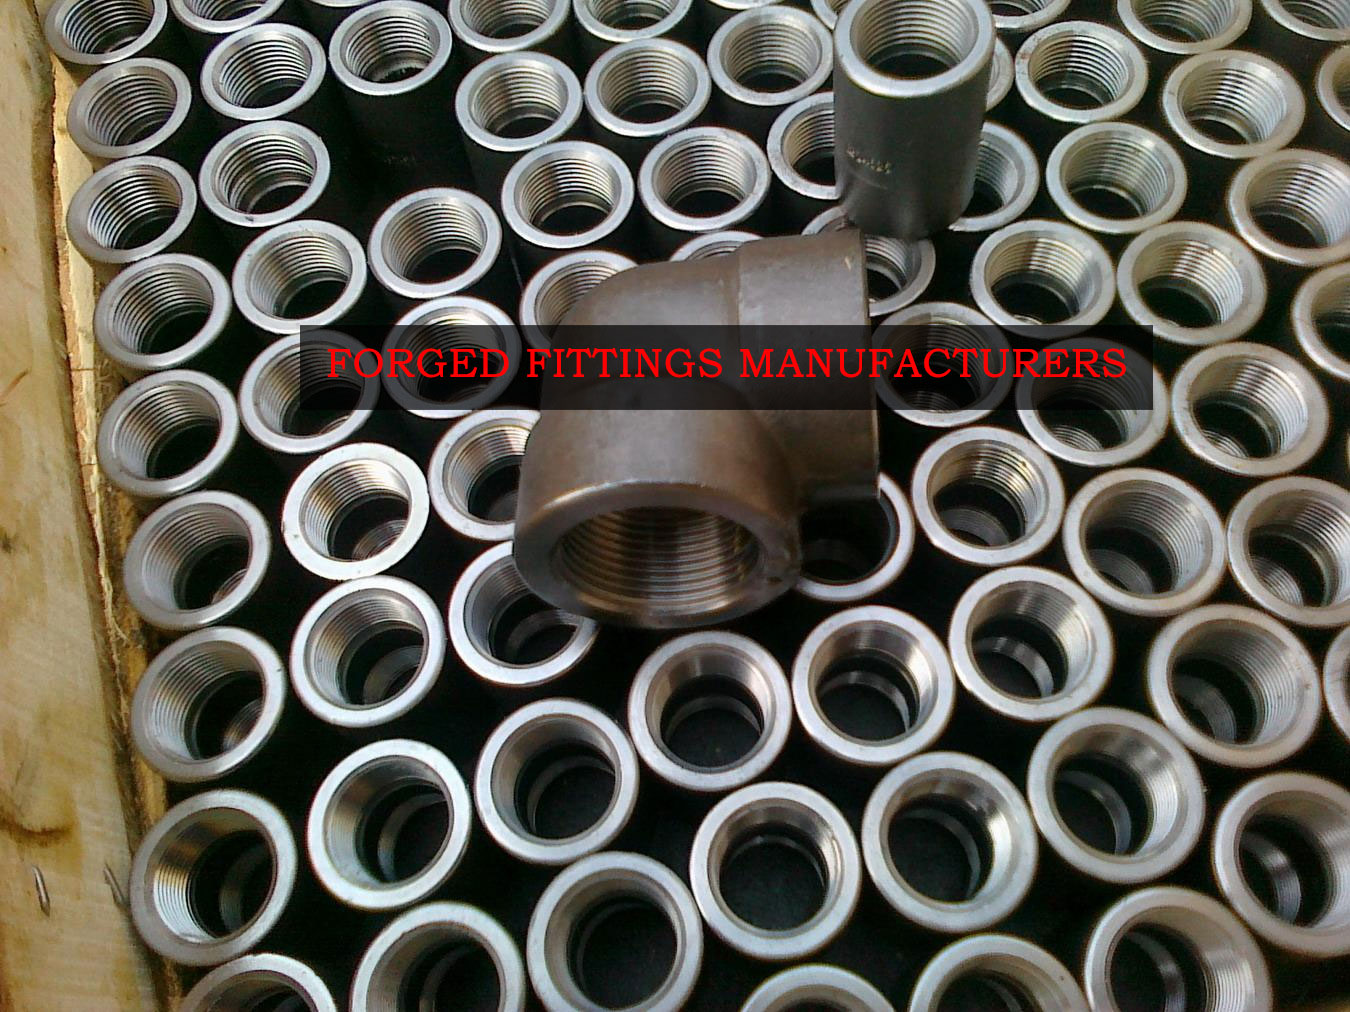 Alloy 20 / 254 SMO / AISI 4130 Forged Fittings